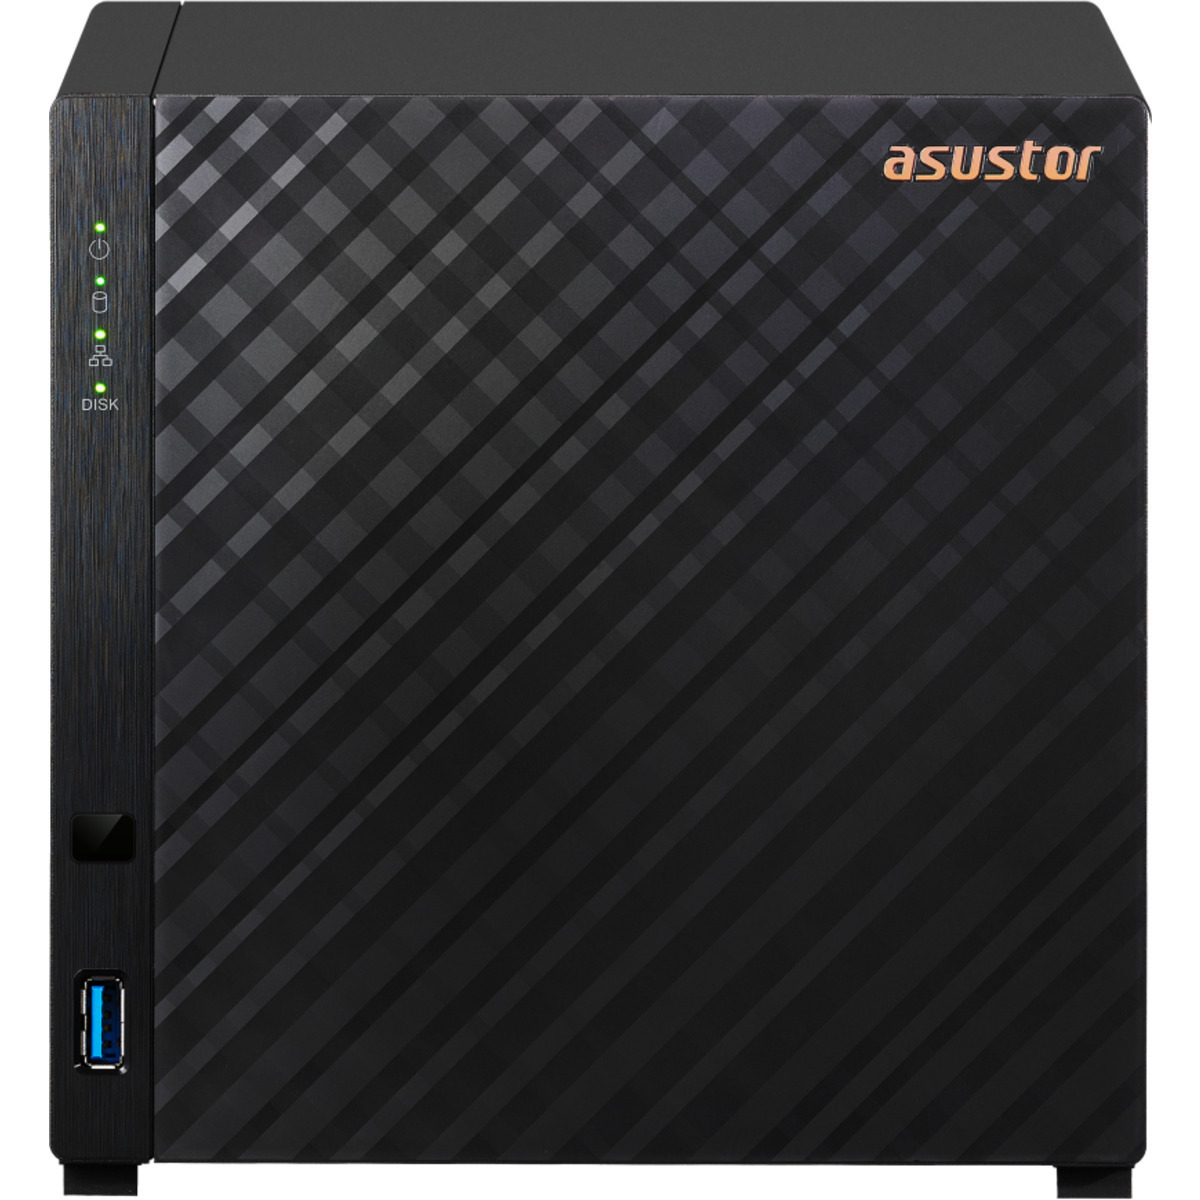 ASUSTOR DRIVESTOR 4 AS1104T 40tb 4-Bay Desktop Personal / Basic Home / Small Office NAS - Network Attached Storage Device 4x10tb Seagate IronWolf Pro ST10000NT001 3.5 7200rpm SATA 6Gb/s HDD NAS Class Drives Installed - Burn-In Tested - ON SALE DRIVESTOR 4 AS1104T